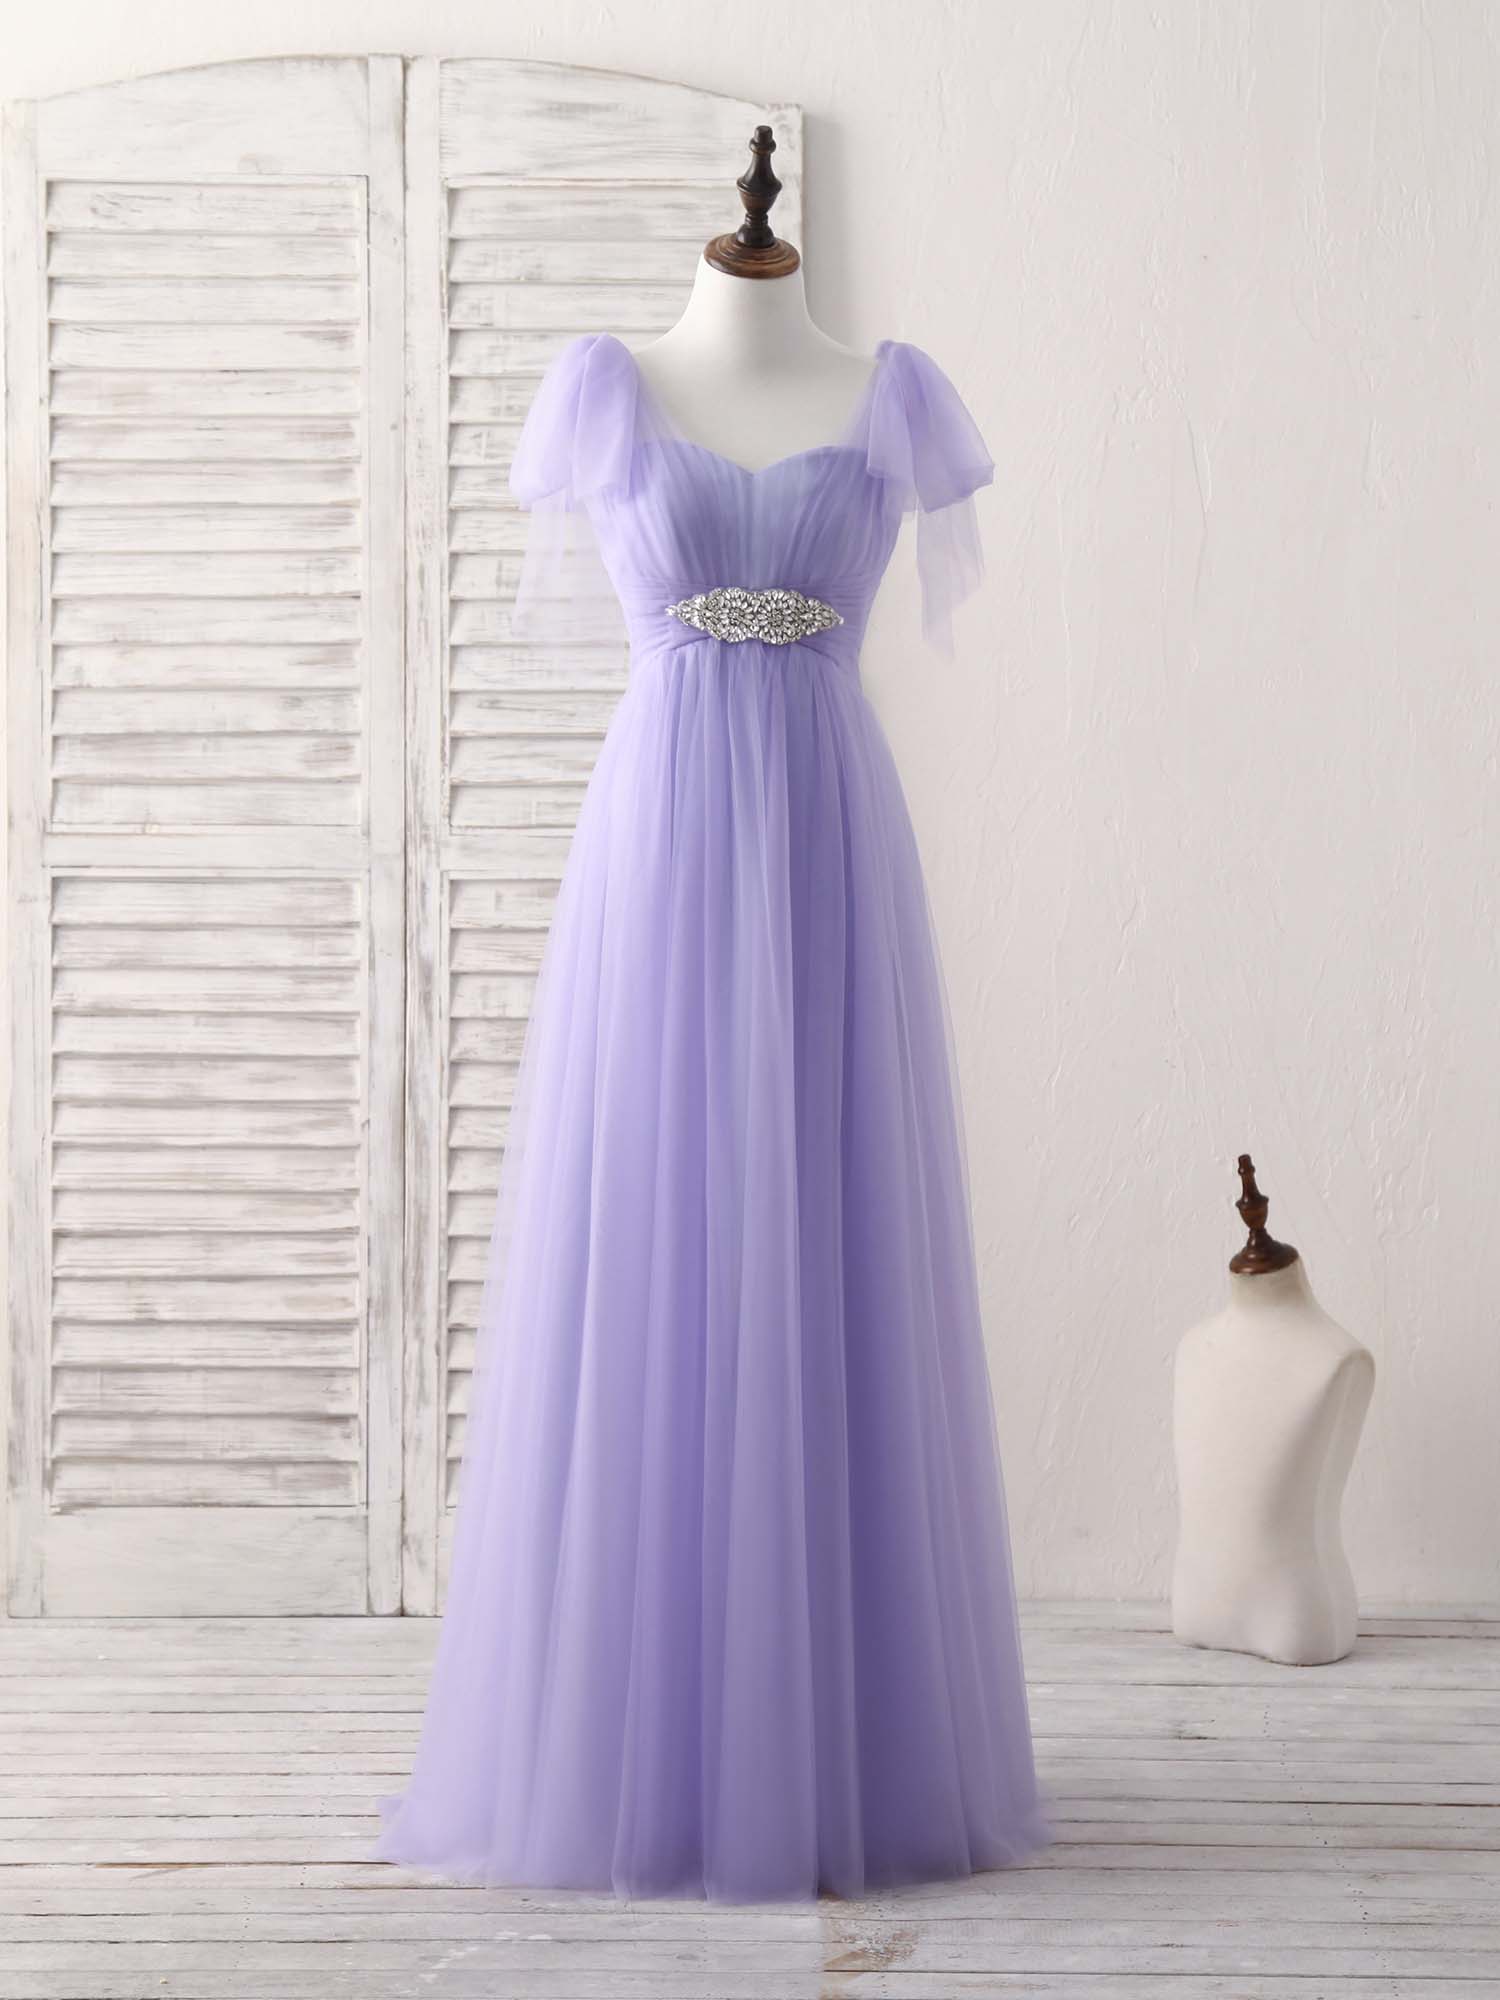 Party Dress With Sleeves, Purple Sweetheart Neck Tulle Long Prom Dress Purple Bridesmaid Dress